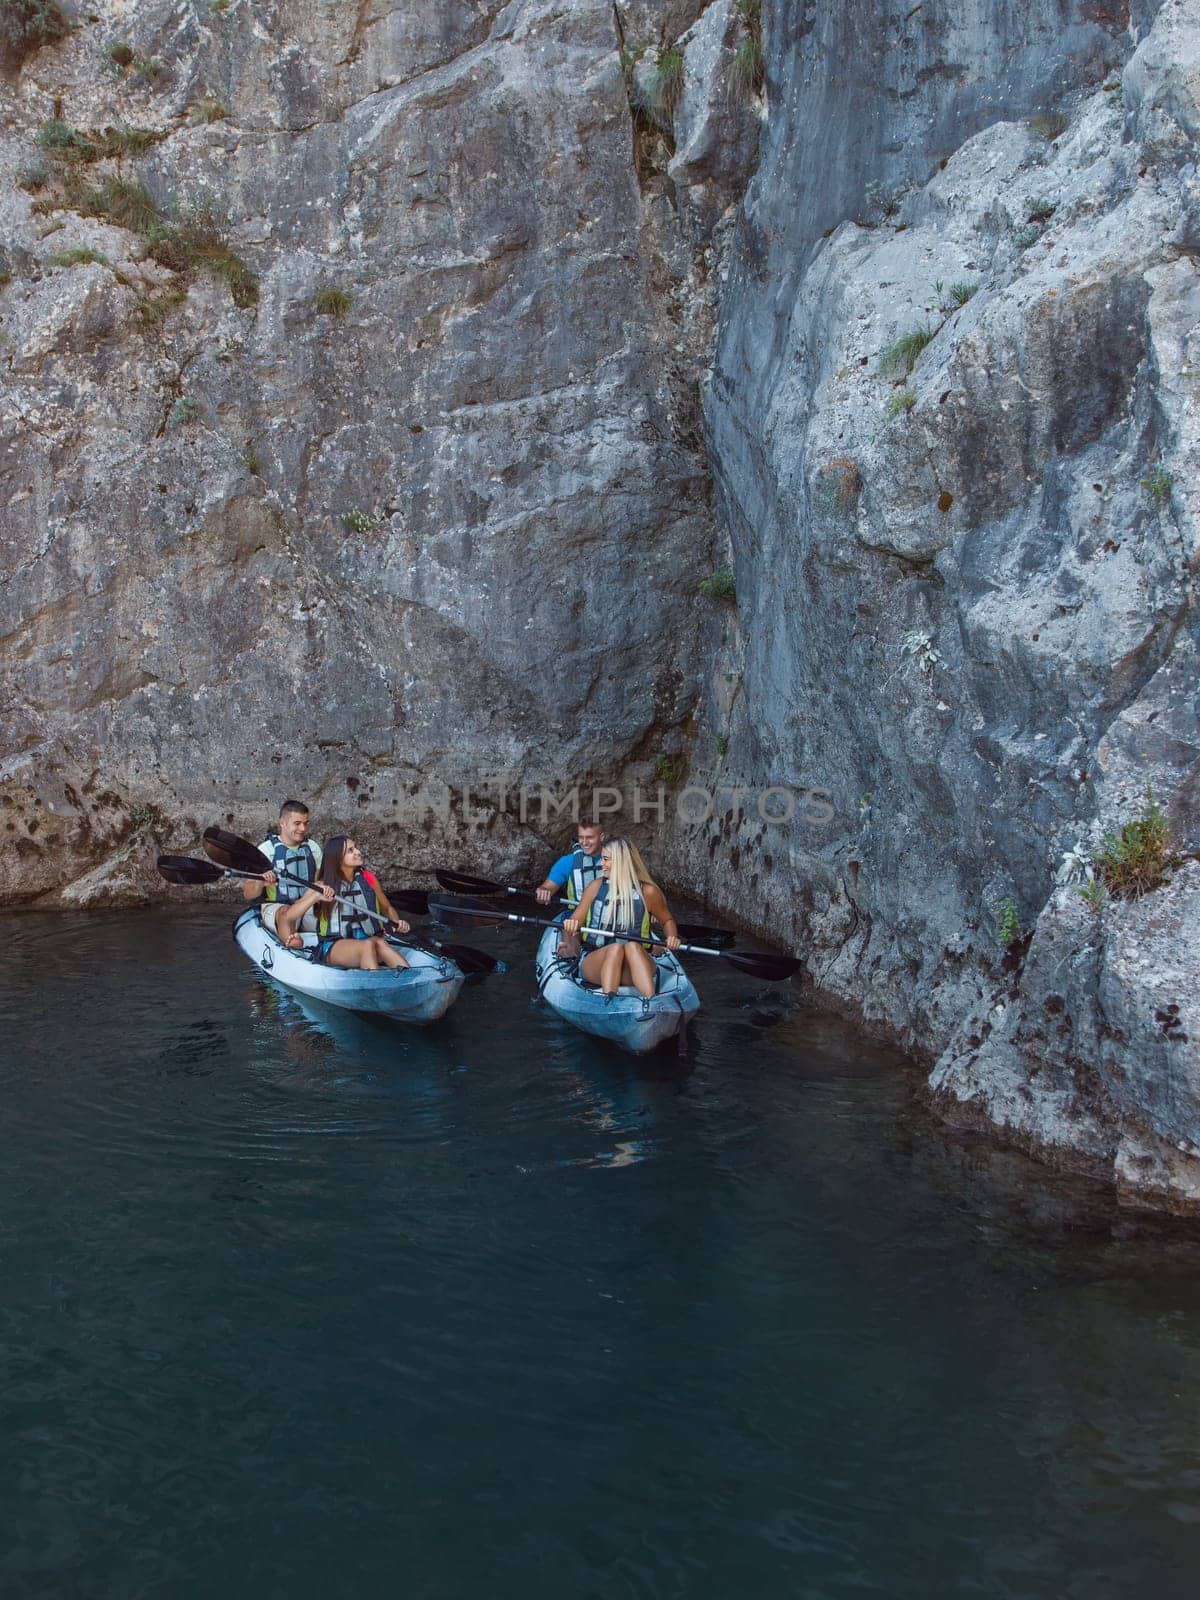 A group of friends enjoying fun and kayaking exploring the calm river, surrounding forest and large natural river canyons during an idyllic sunset